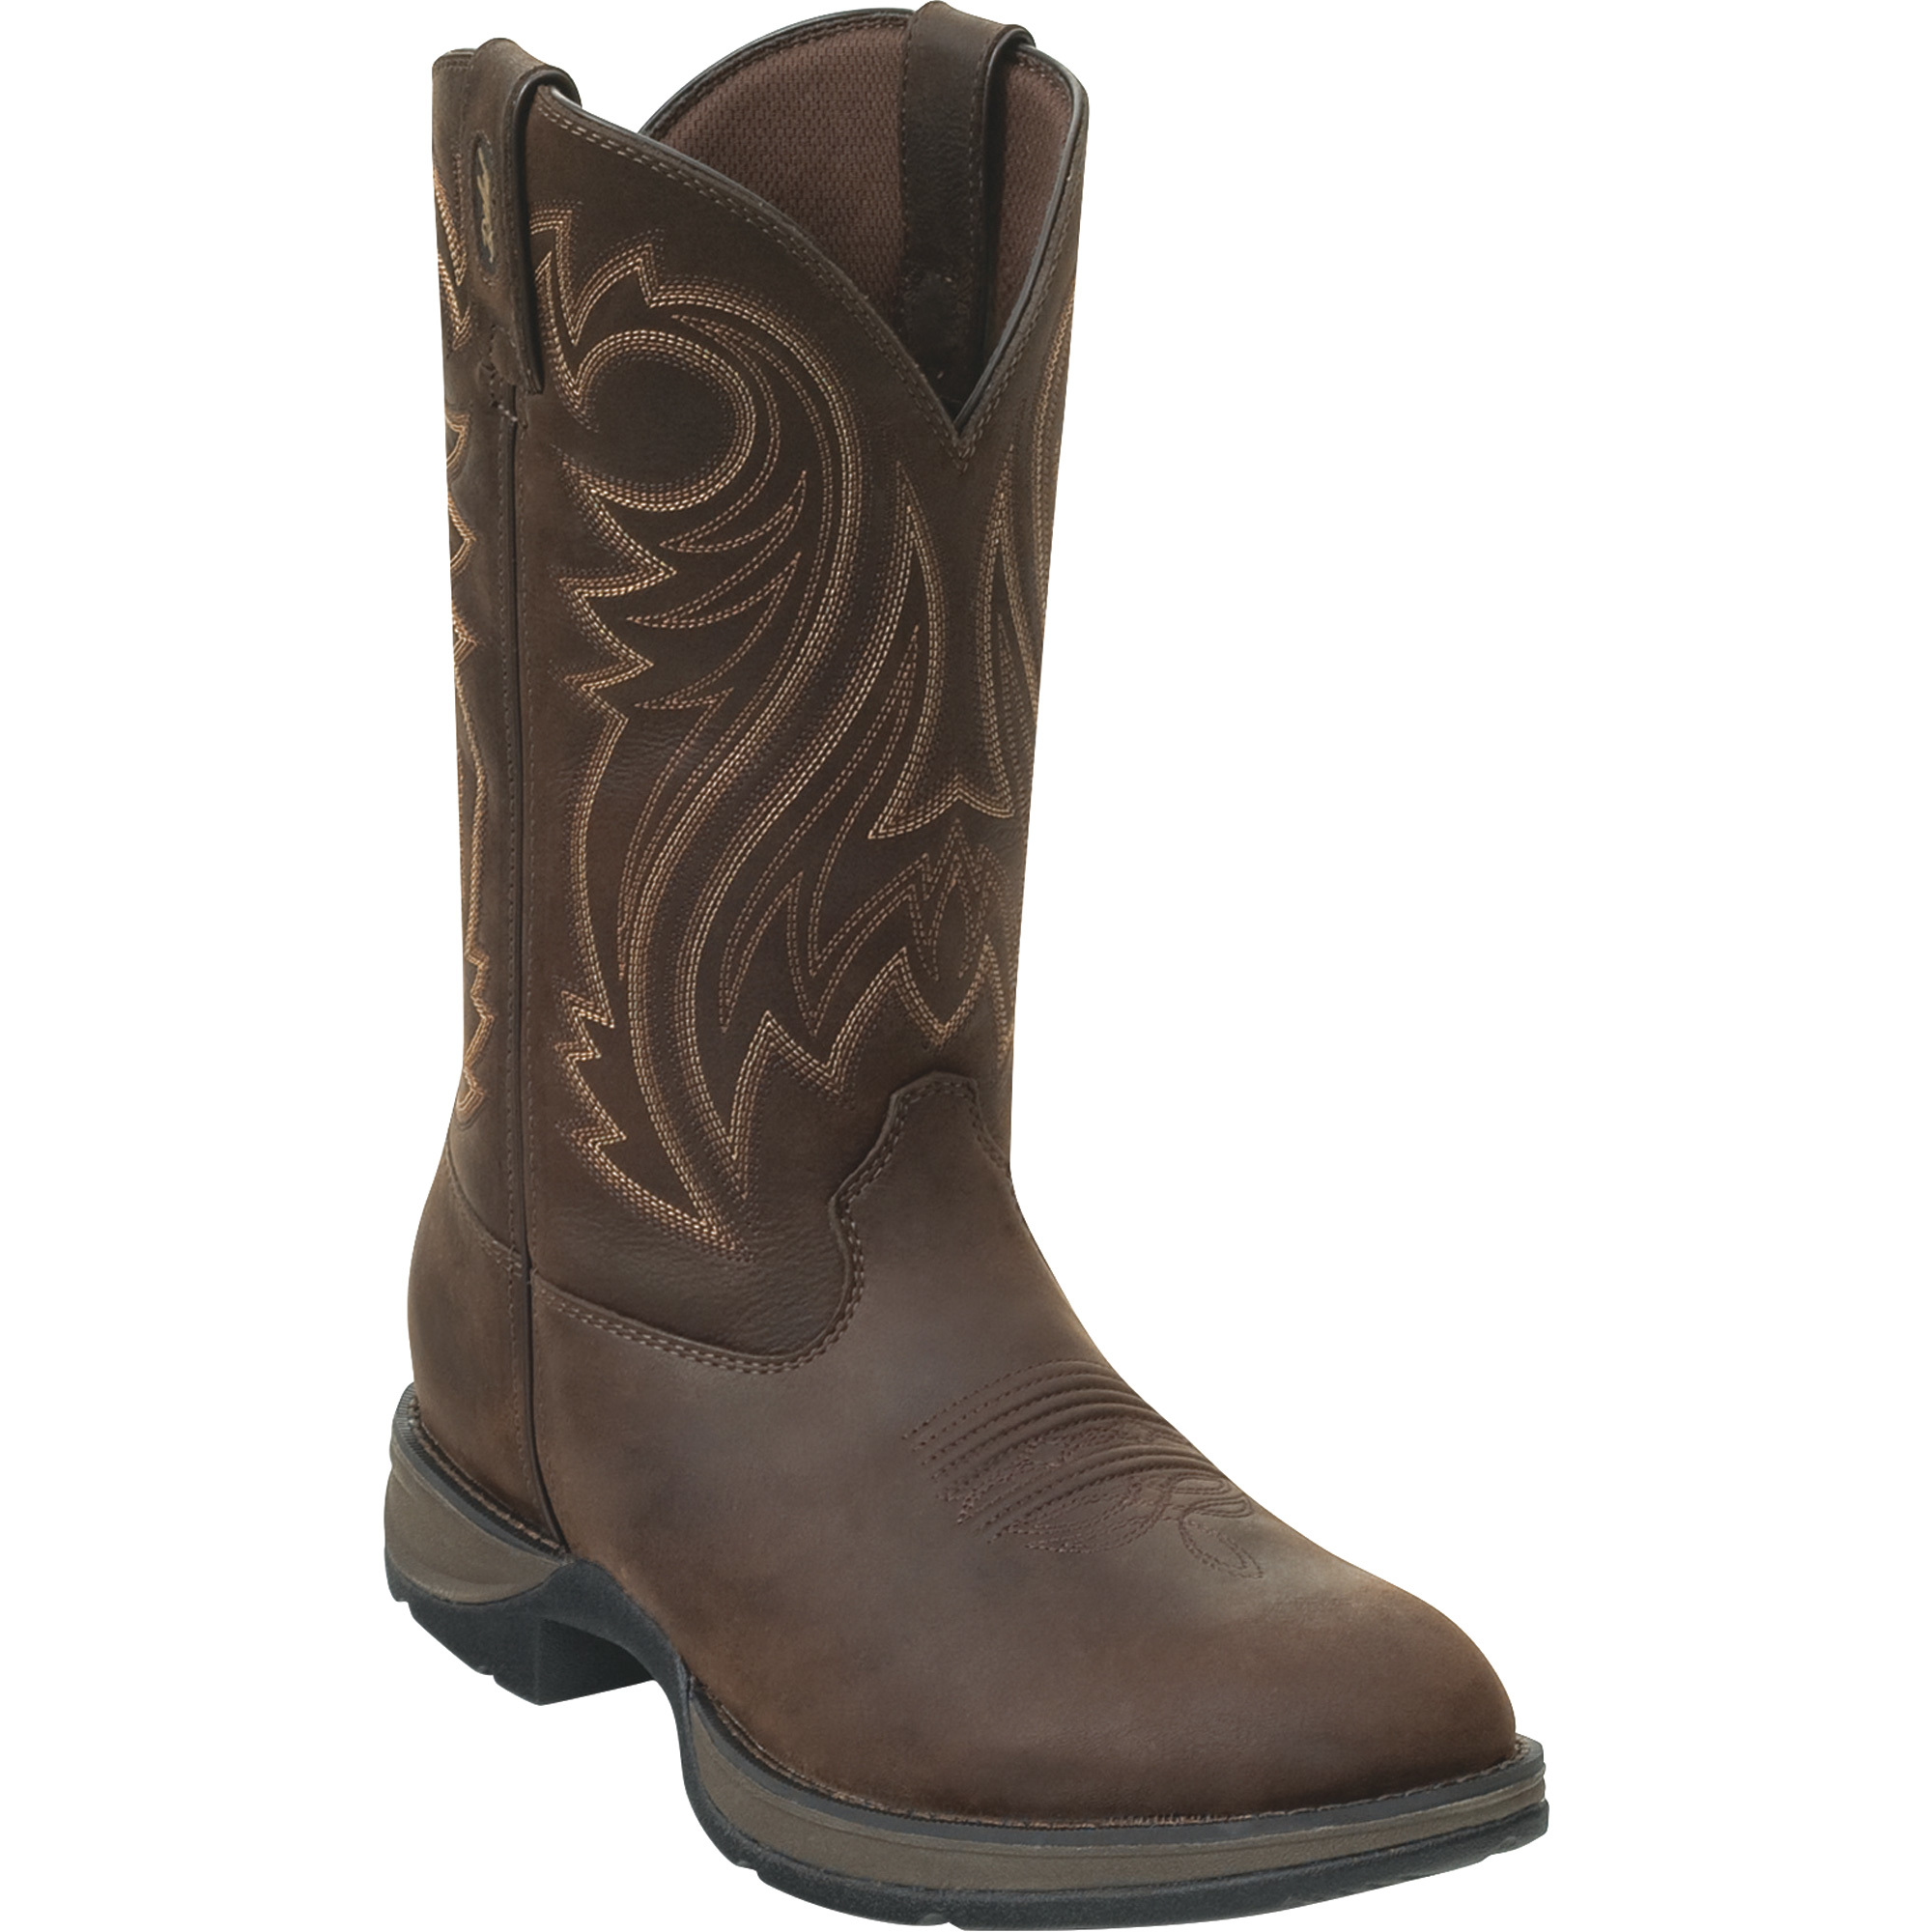 Durango Men's Rebel 12Inch Pull-On Western Work Boots - Chocolate, Size 11, Model DB 5464